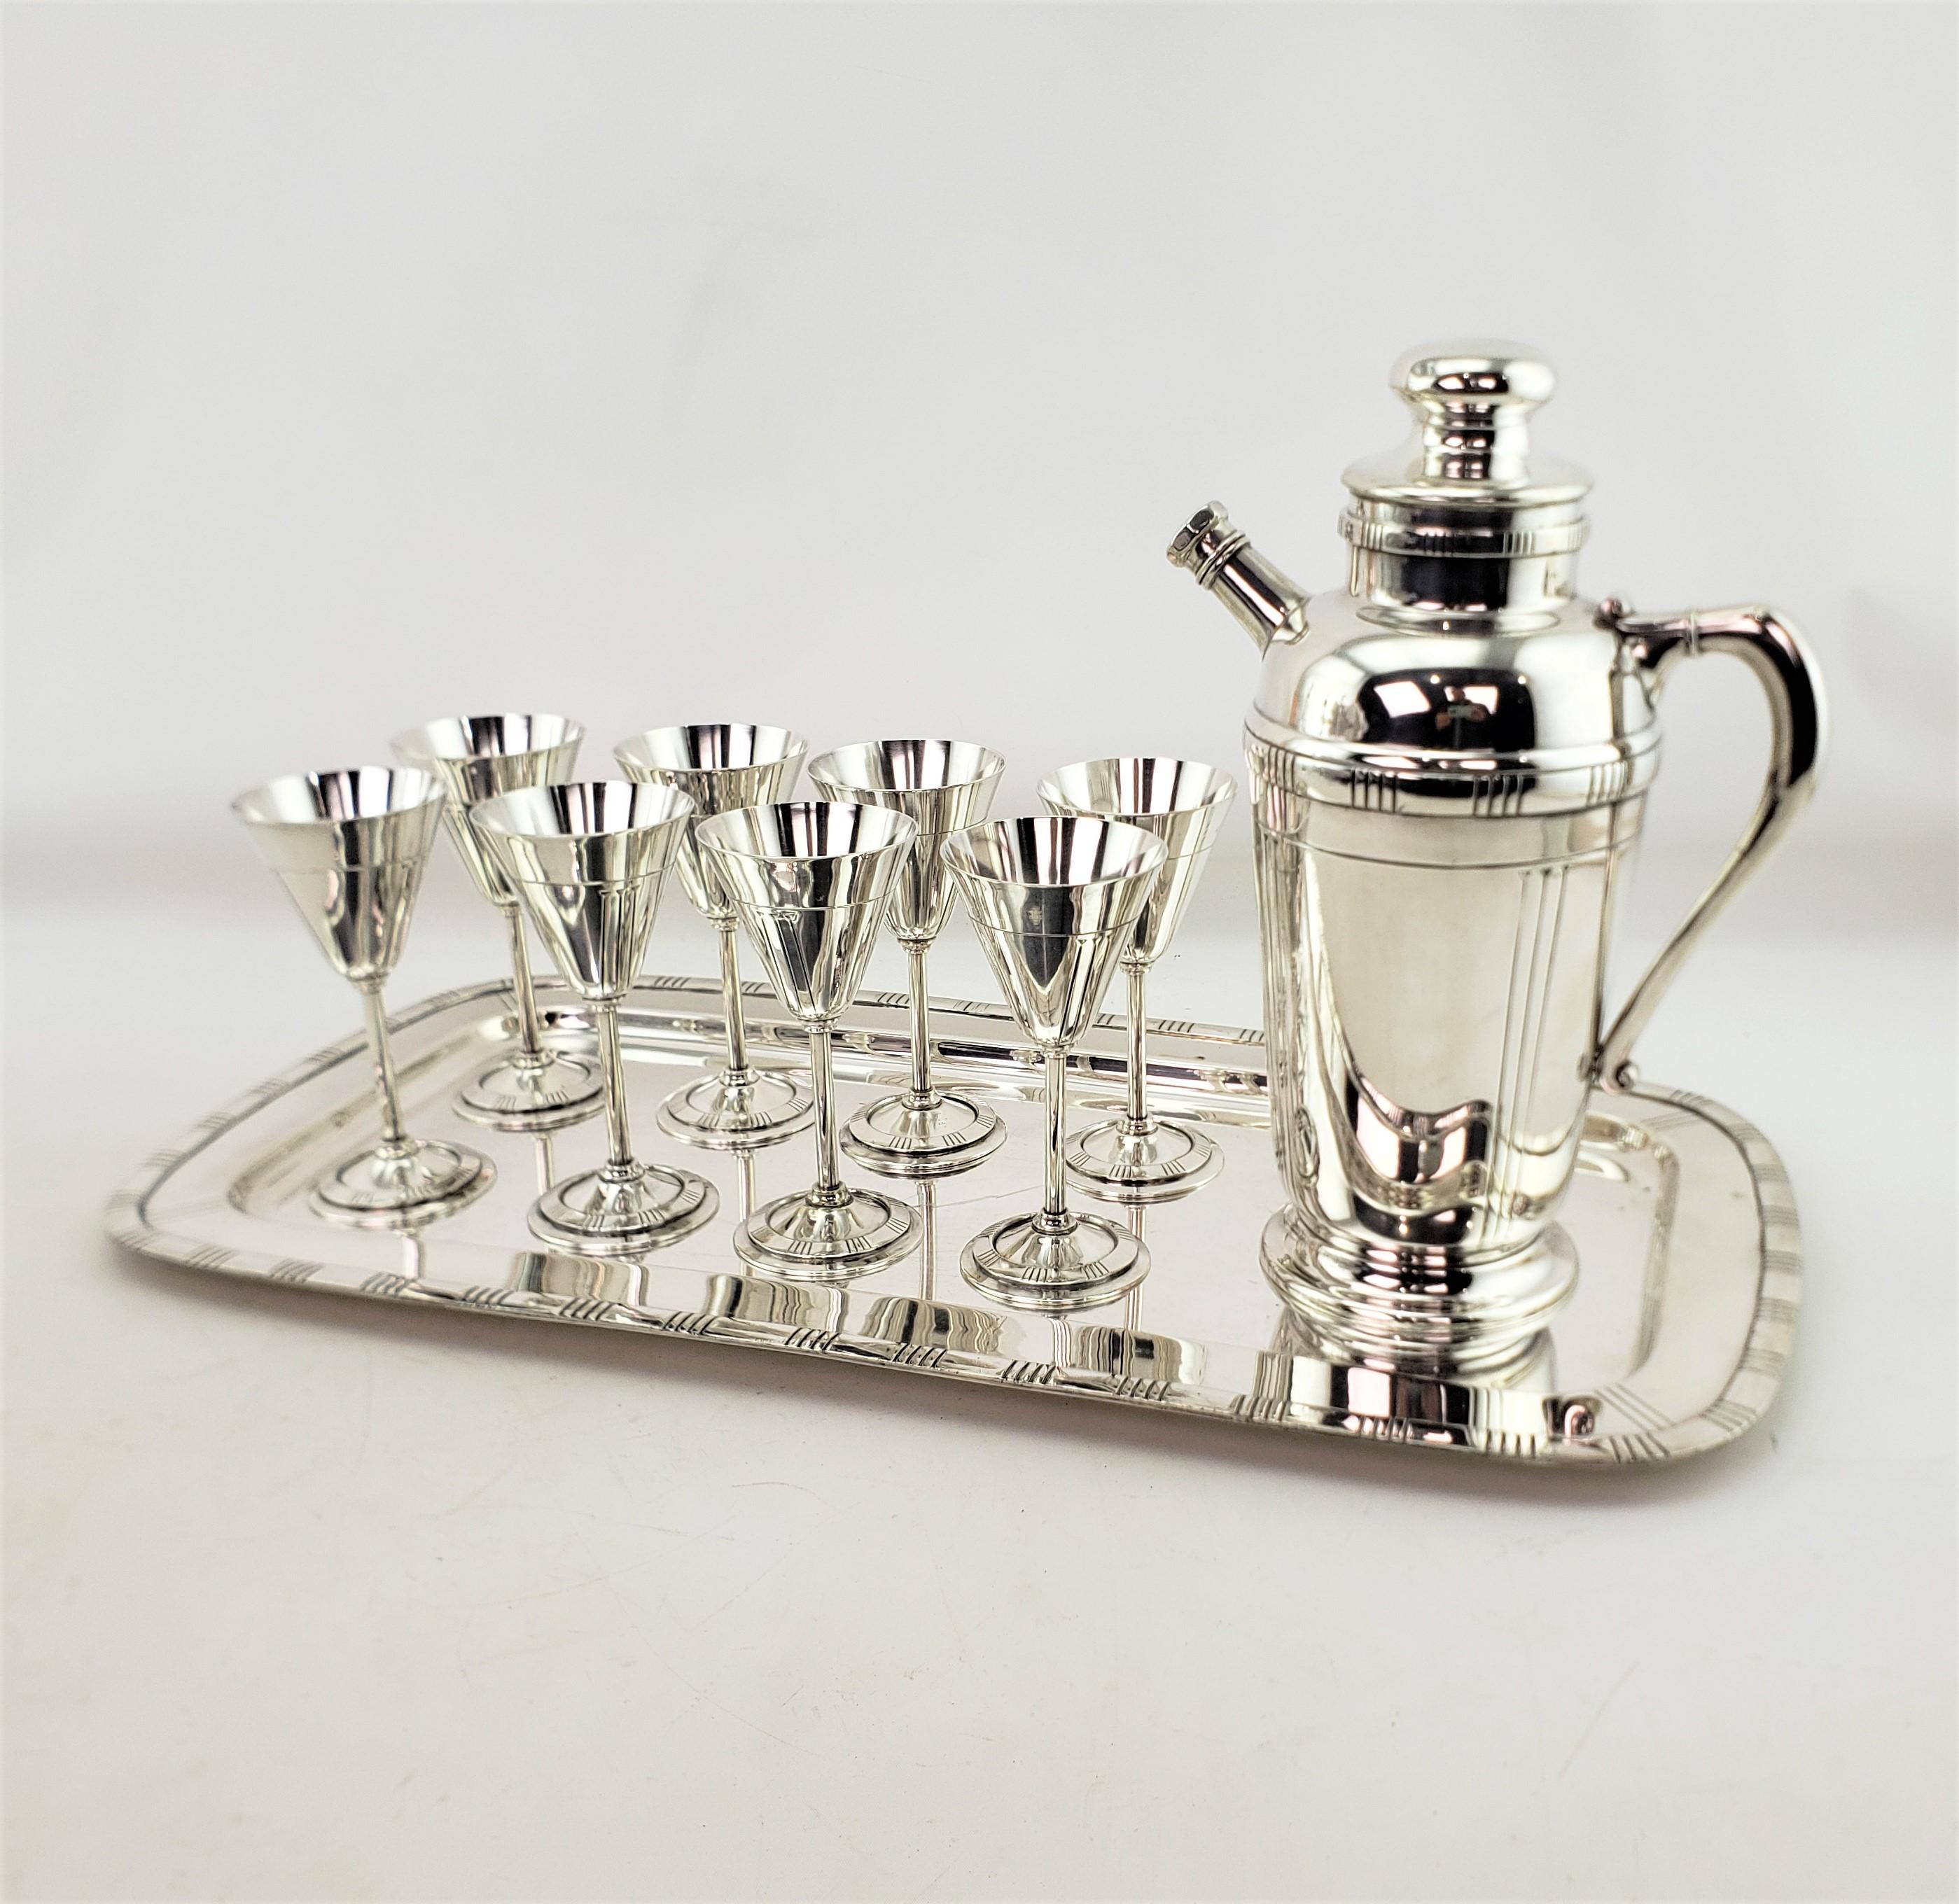 Machine-Made Midcentury Silver Plated Cocktail Set with Tray, Glasses & Shaker Pitcher For Sale